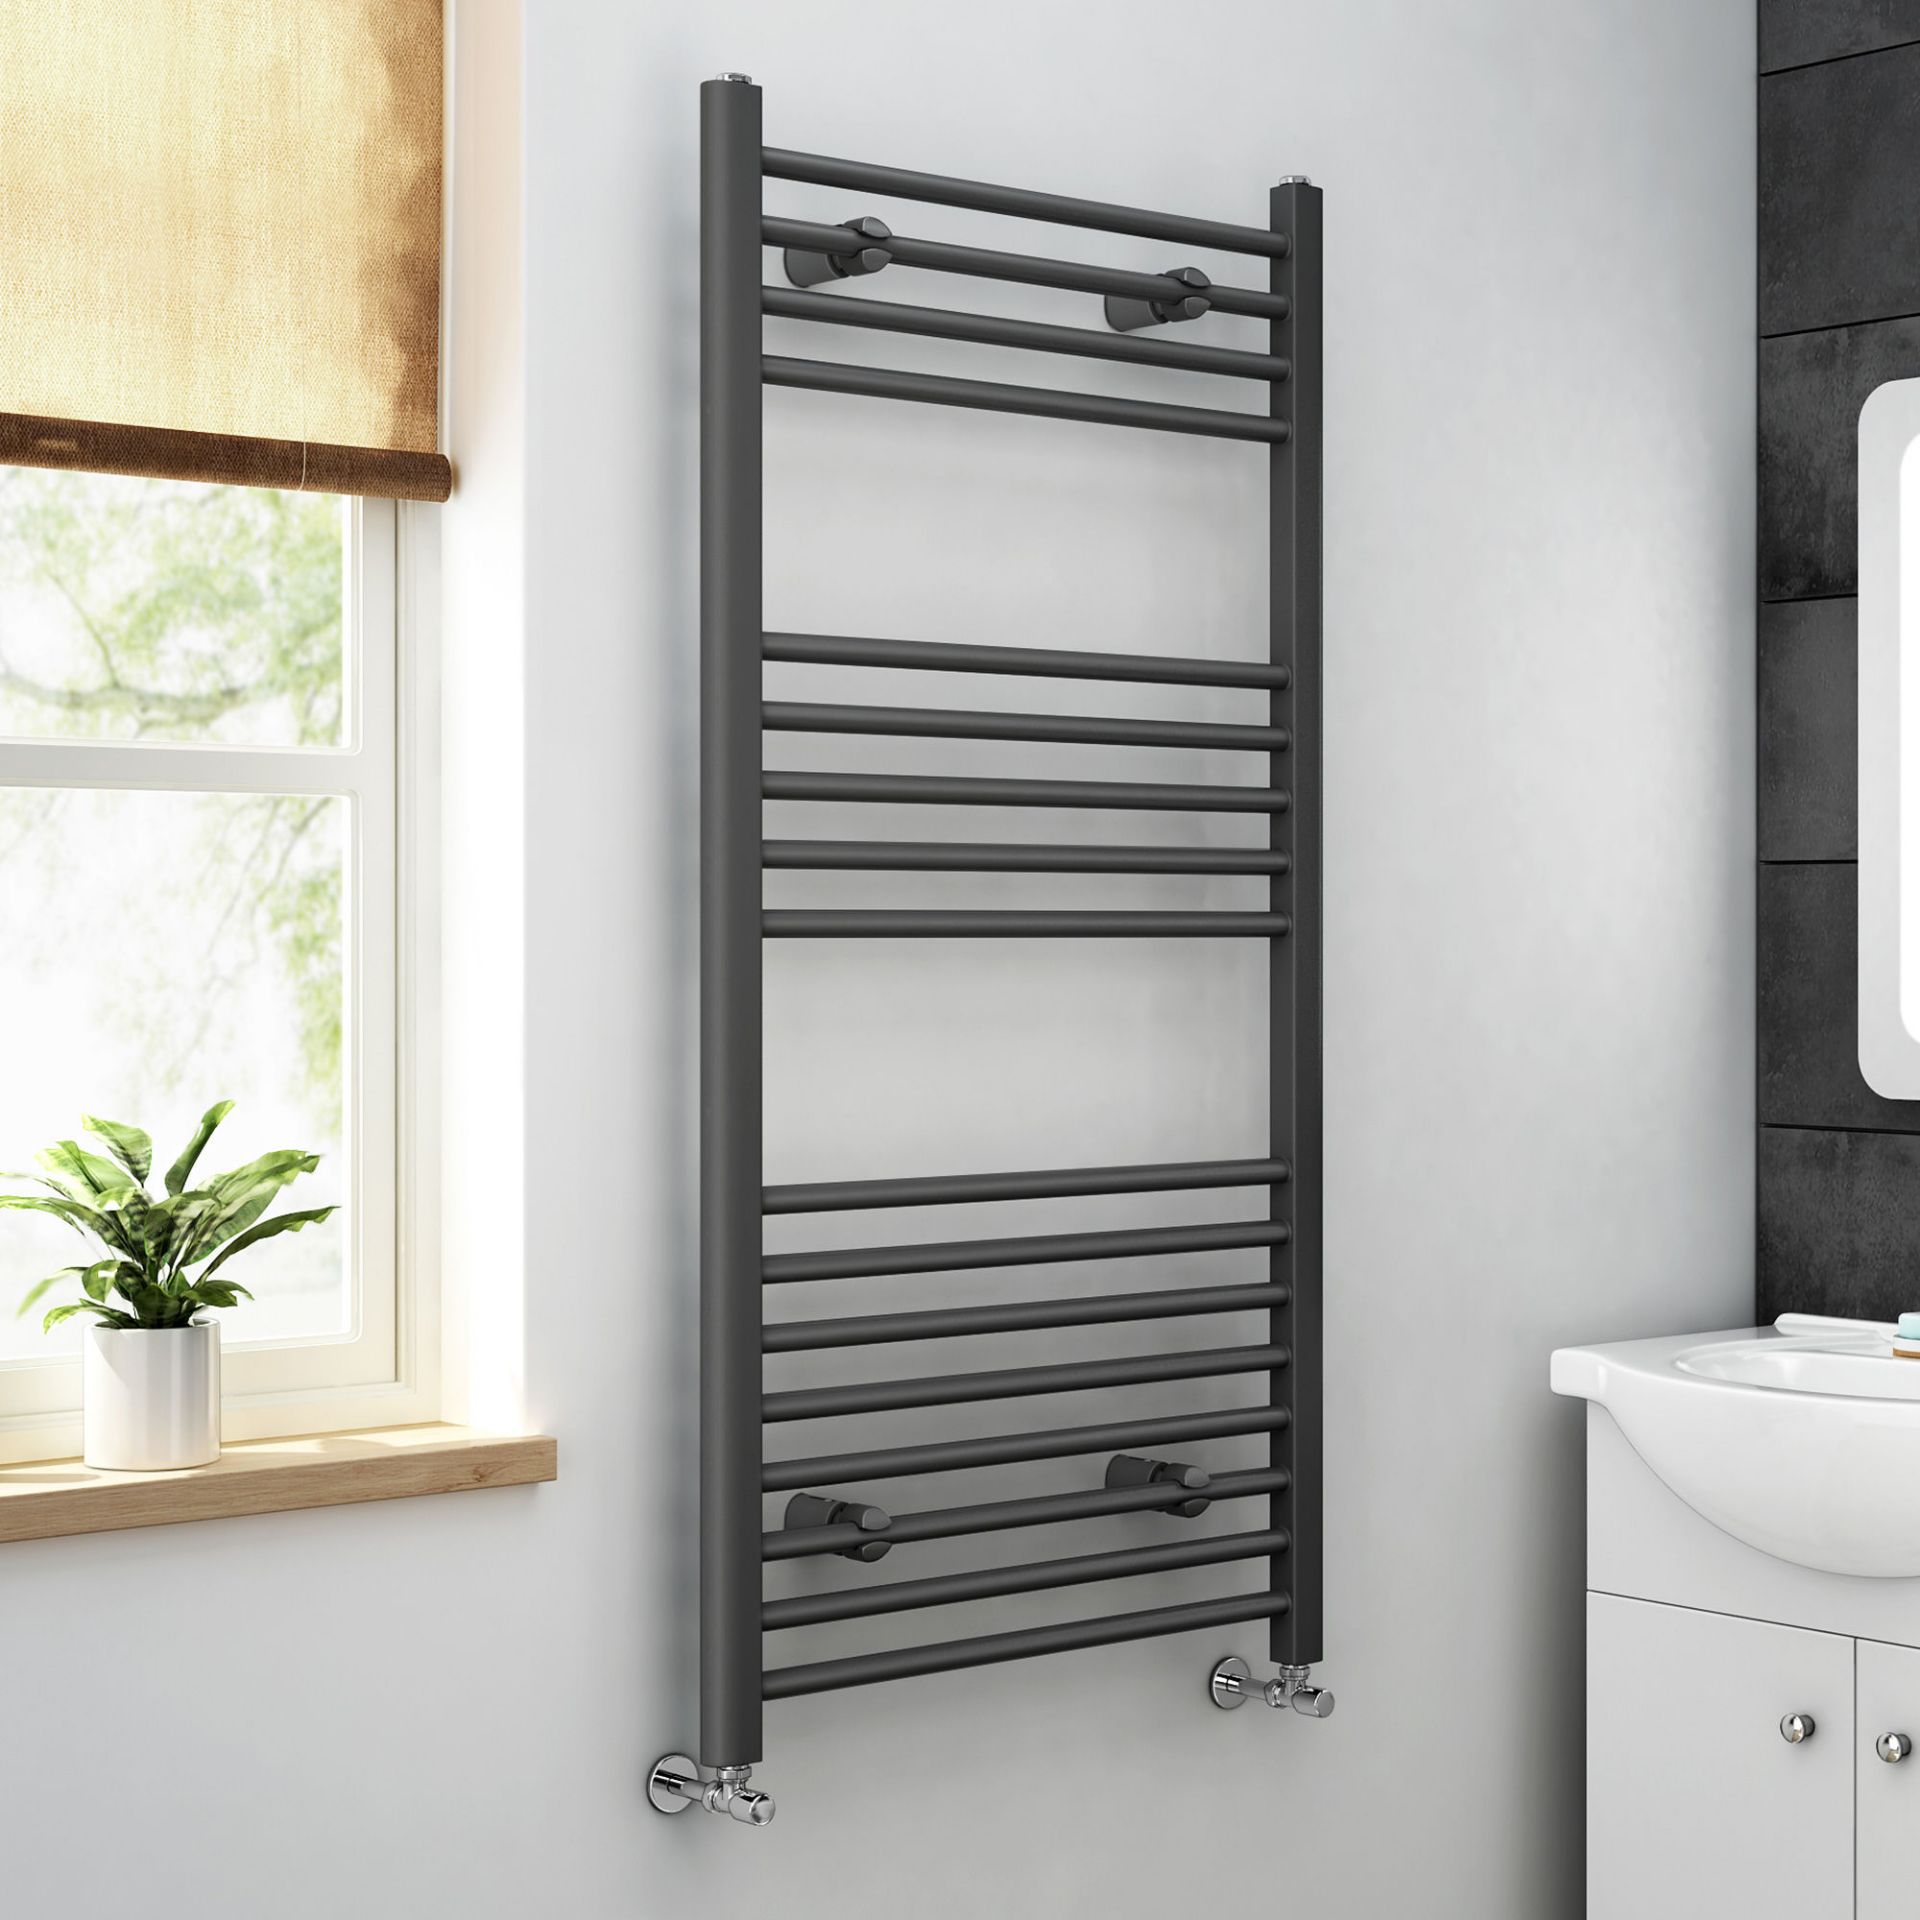 (PP13) 1200x600mm - 20mm Tubes - Anthracite Heated Straight Rail Ladder Towel Radiator. RRP £2...